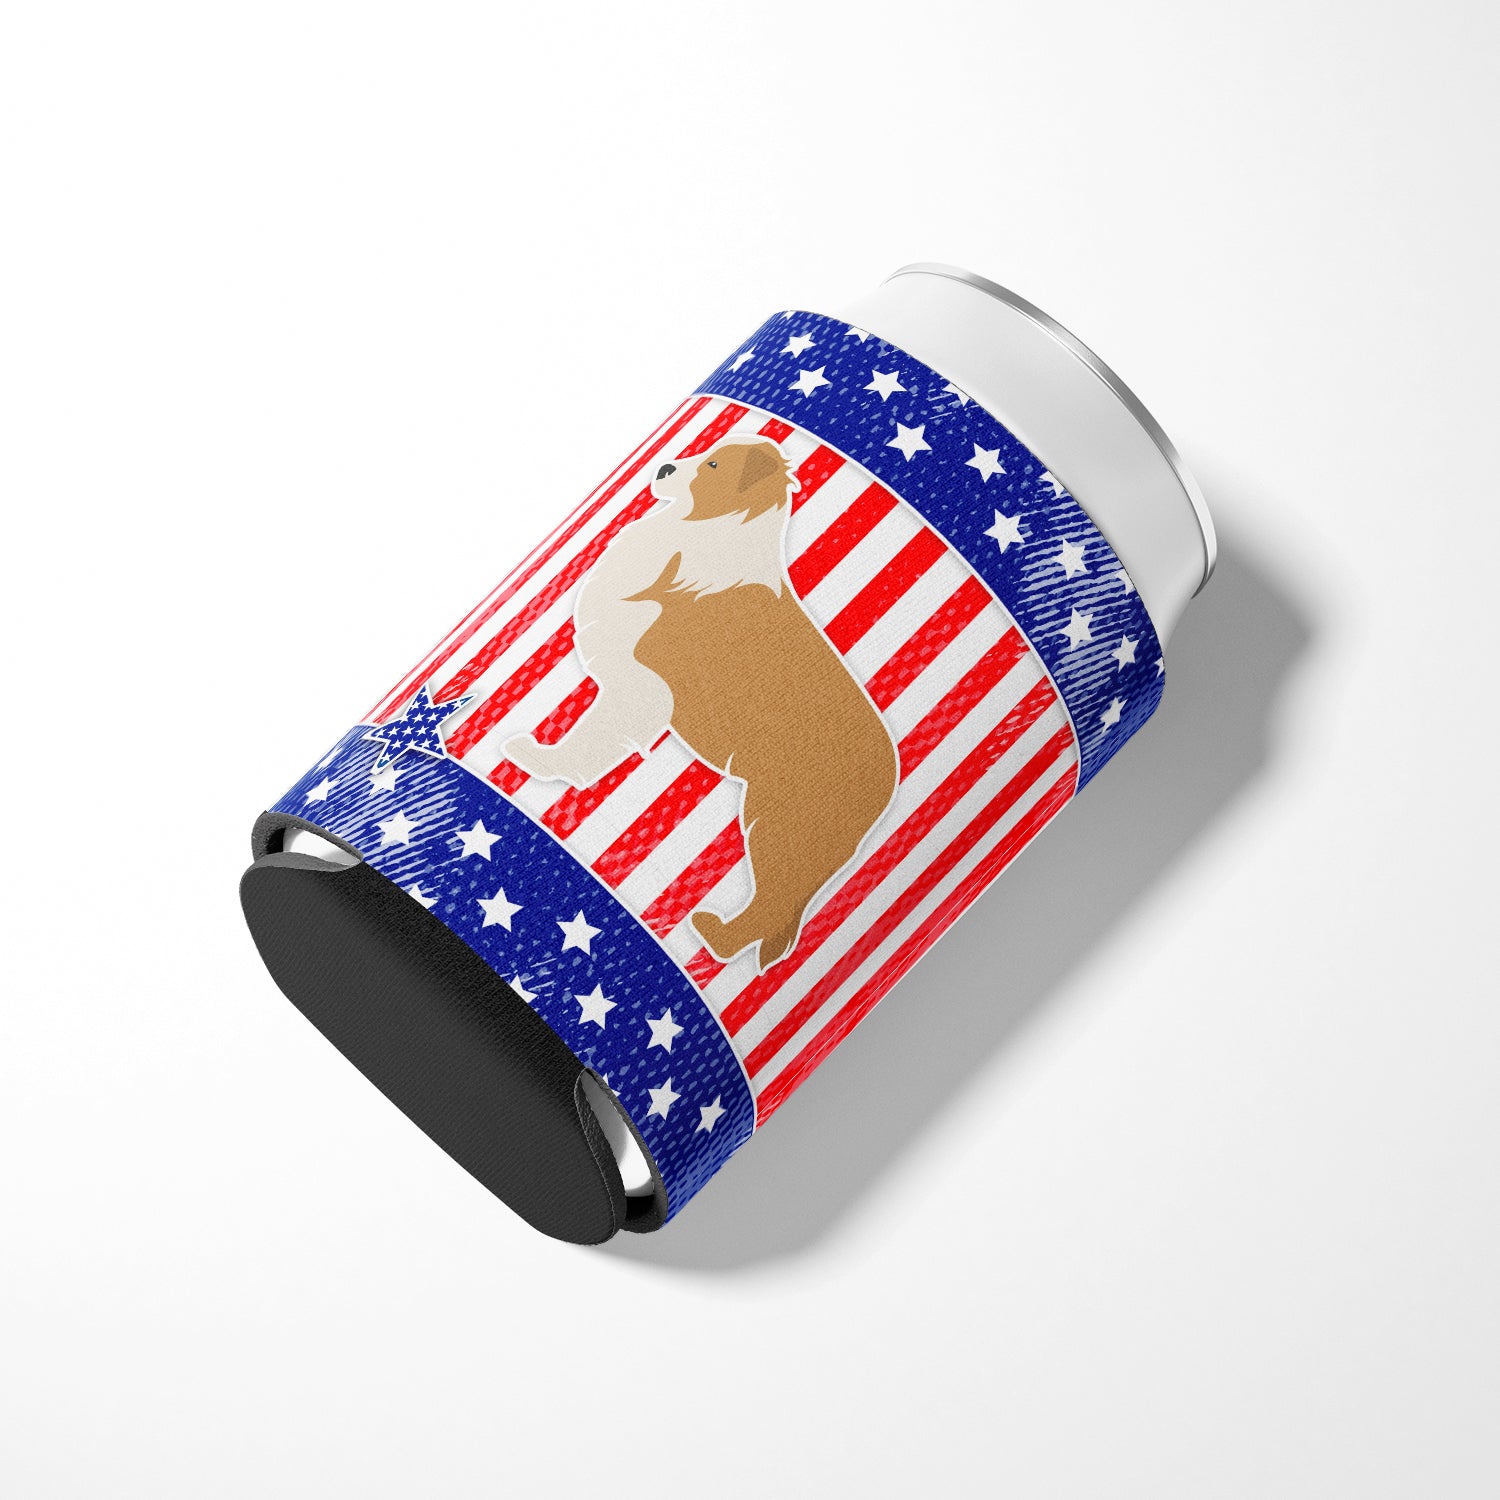 USA Patriotic Red Border Collie Can or Bottle Hugger BB3322CC  the-store.com.